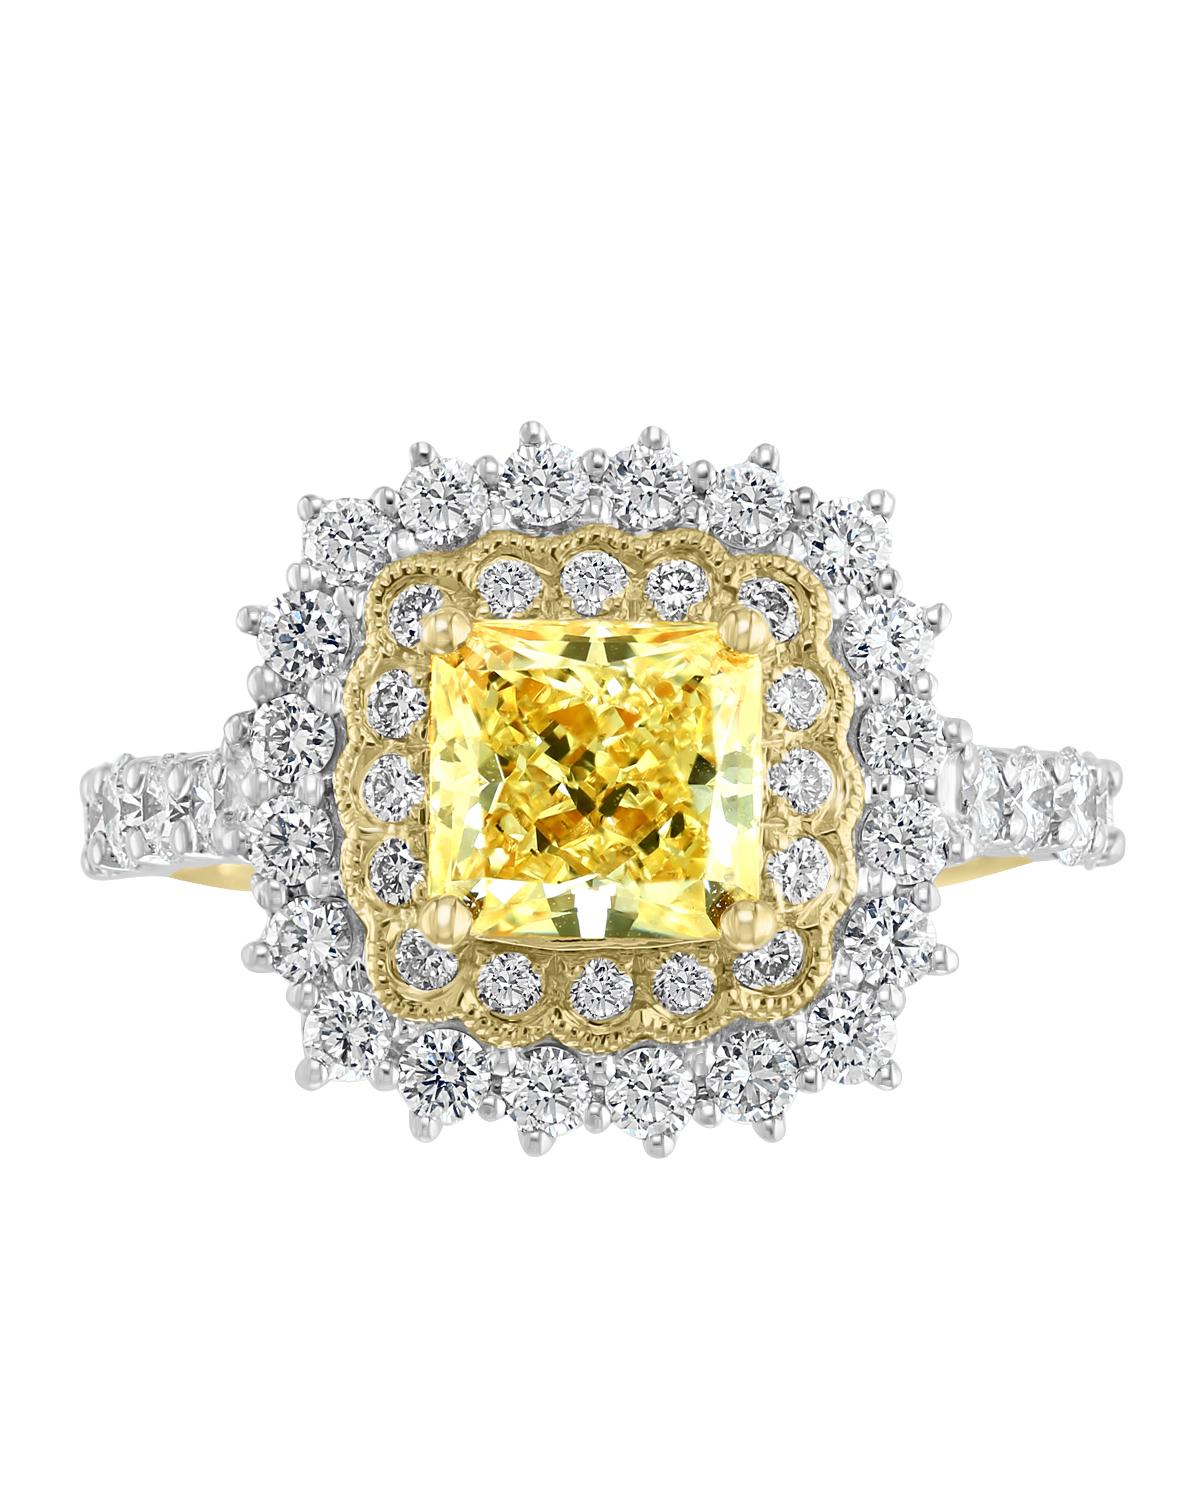 Set in a gloving 2-Tone setting with Yellow Gold inside the shank and around the large center stone.
This Effy Hematian Ring is set in 18K White & Yellow Gold with a Natural Yellow Diamond Cushion Cut center stone with a weight of 1.50